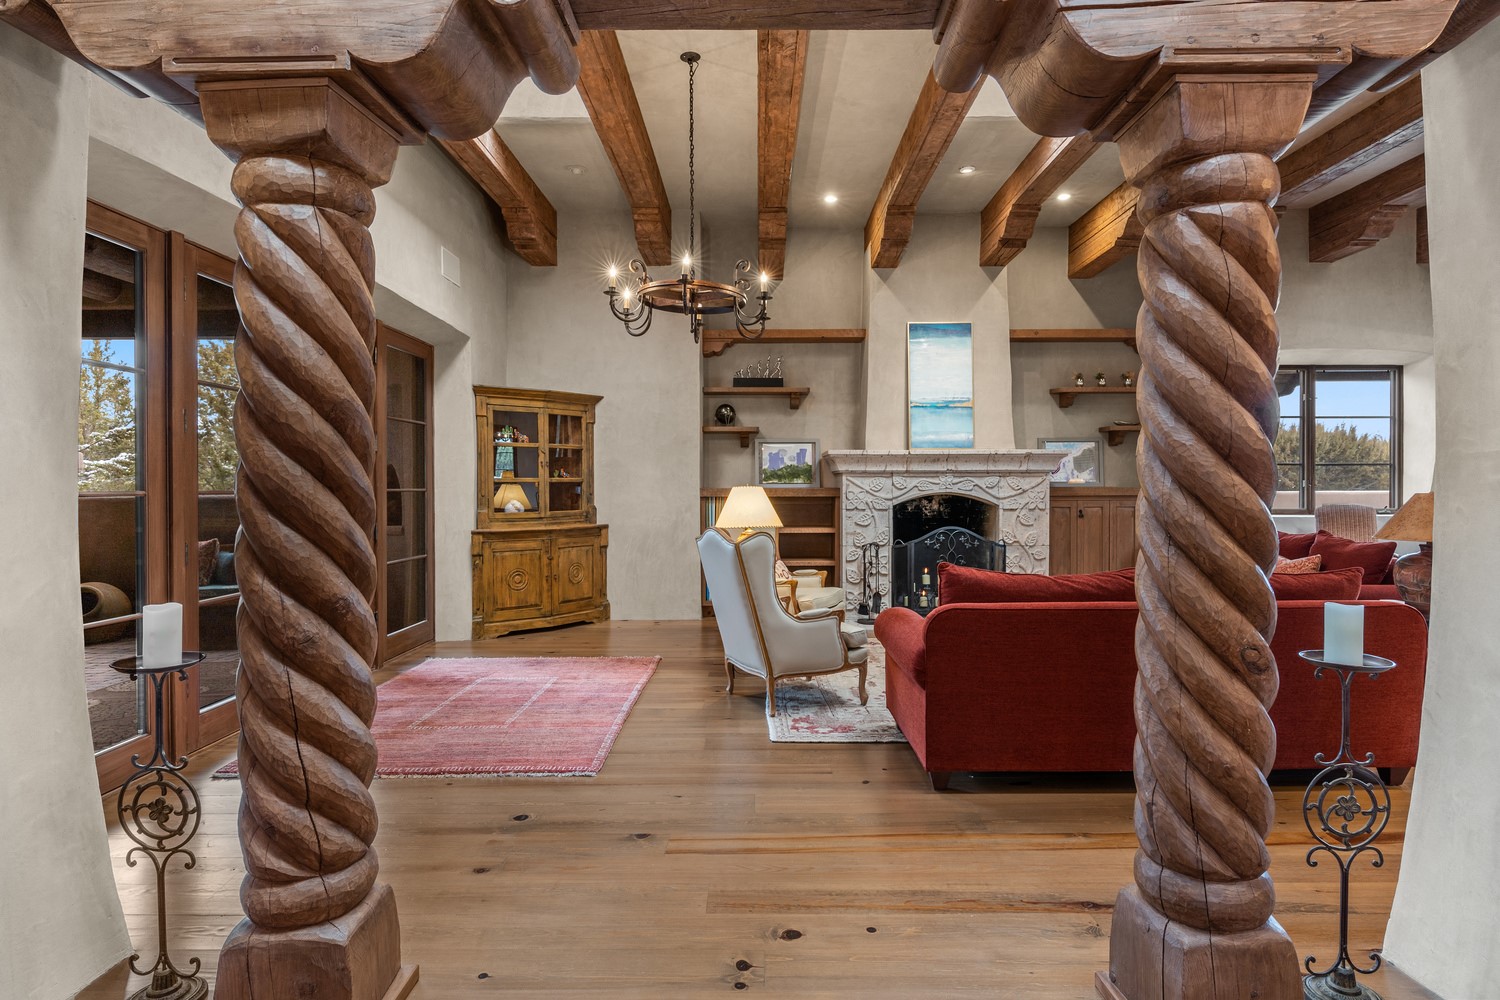 Soaring ceilings and hand-carved wooden columns greet you as you enter the home